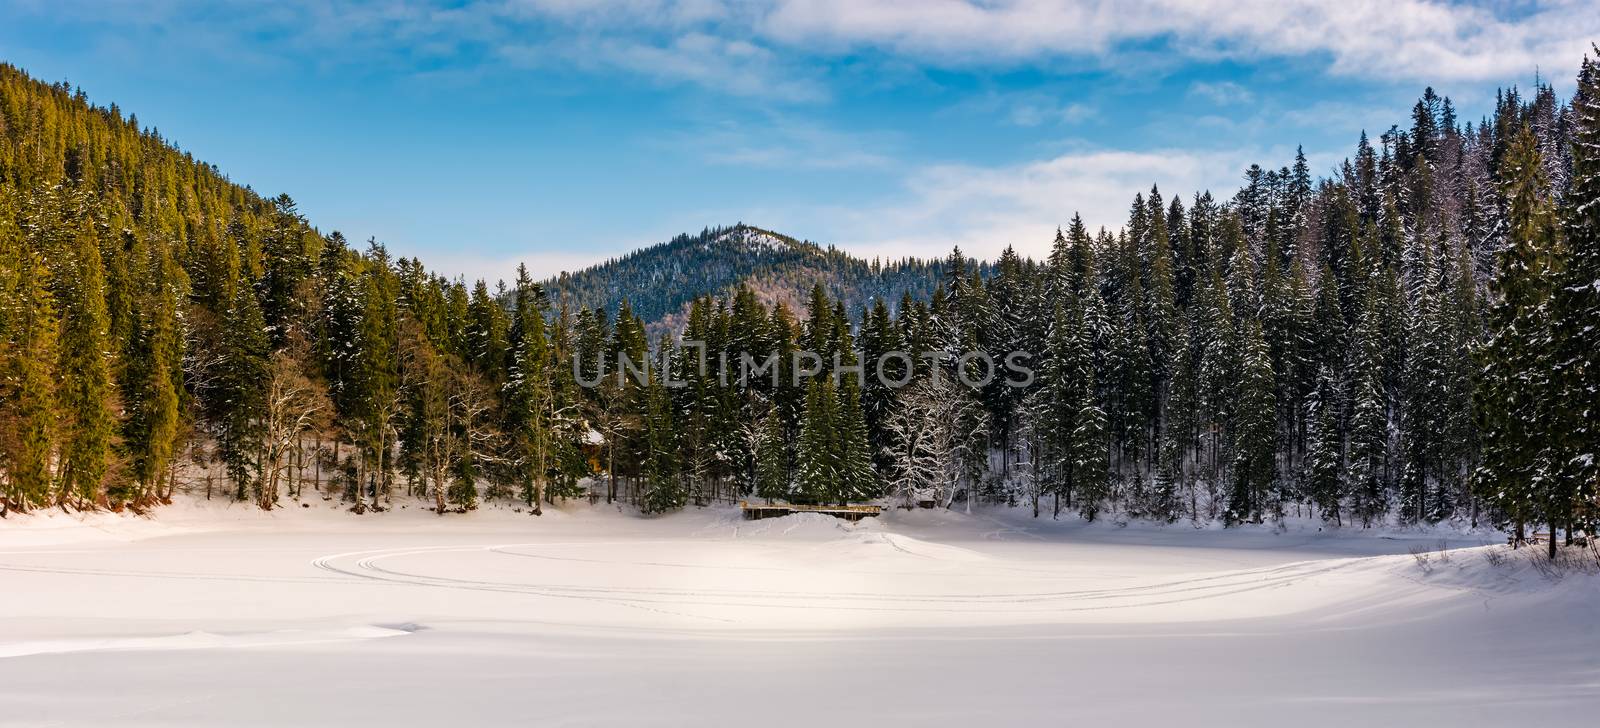 panorama of spruce forest in winter mountains by Pellinni